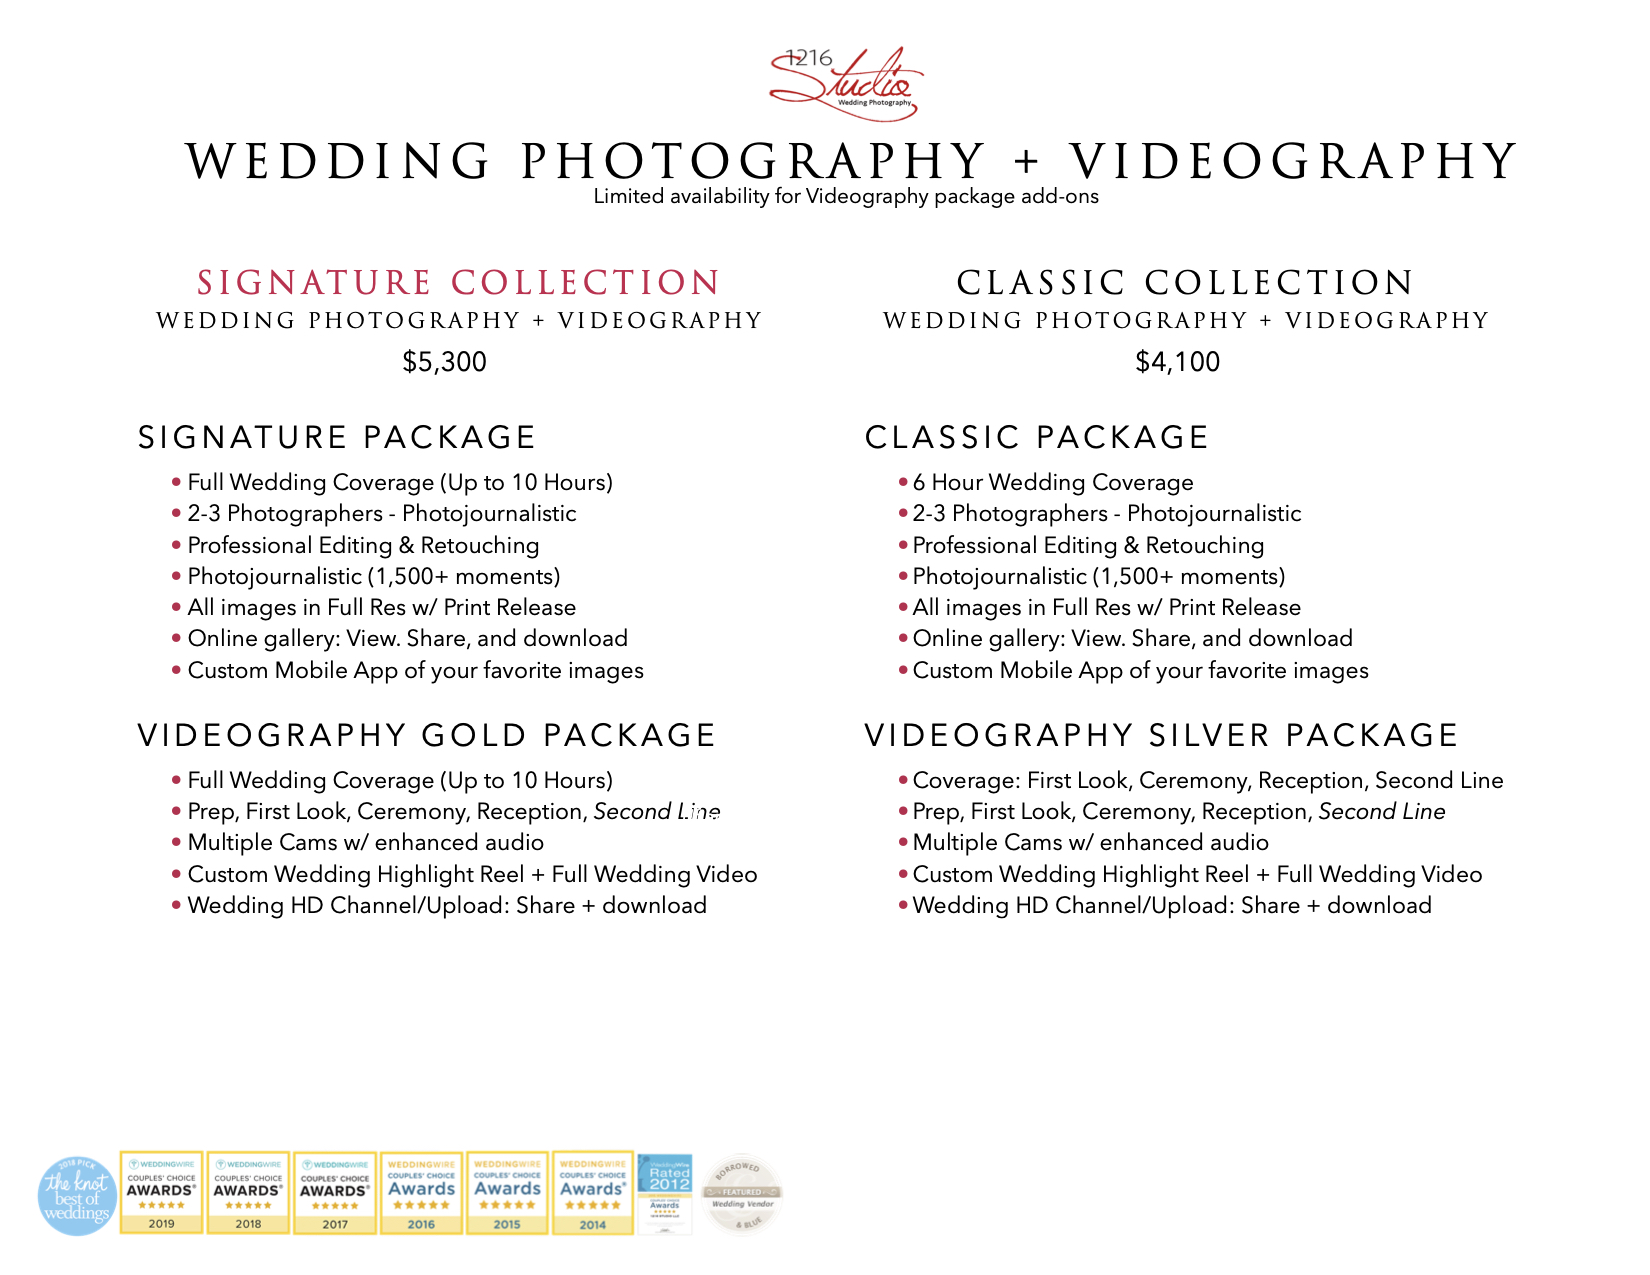 New Orleans Wedding Package Pricing Add-On Prices 1216 Studio